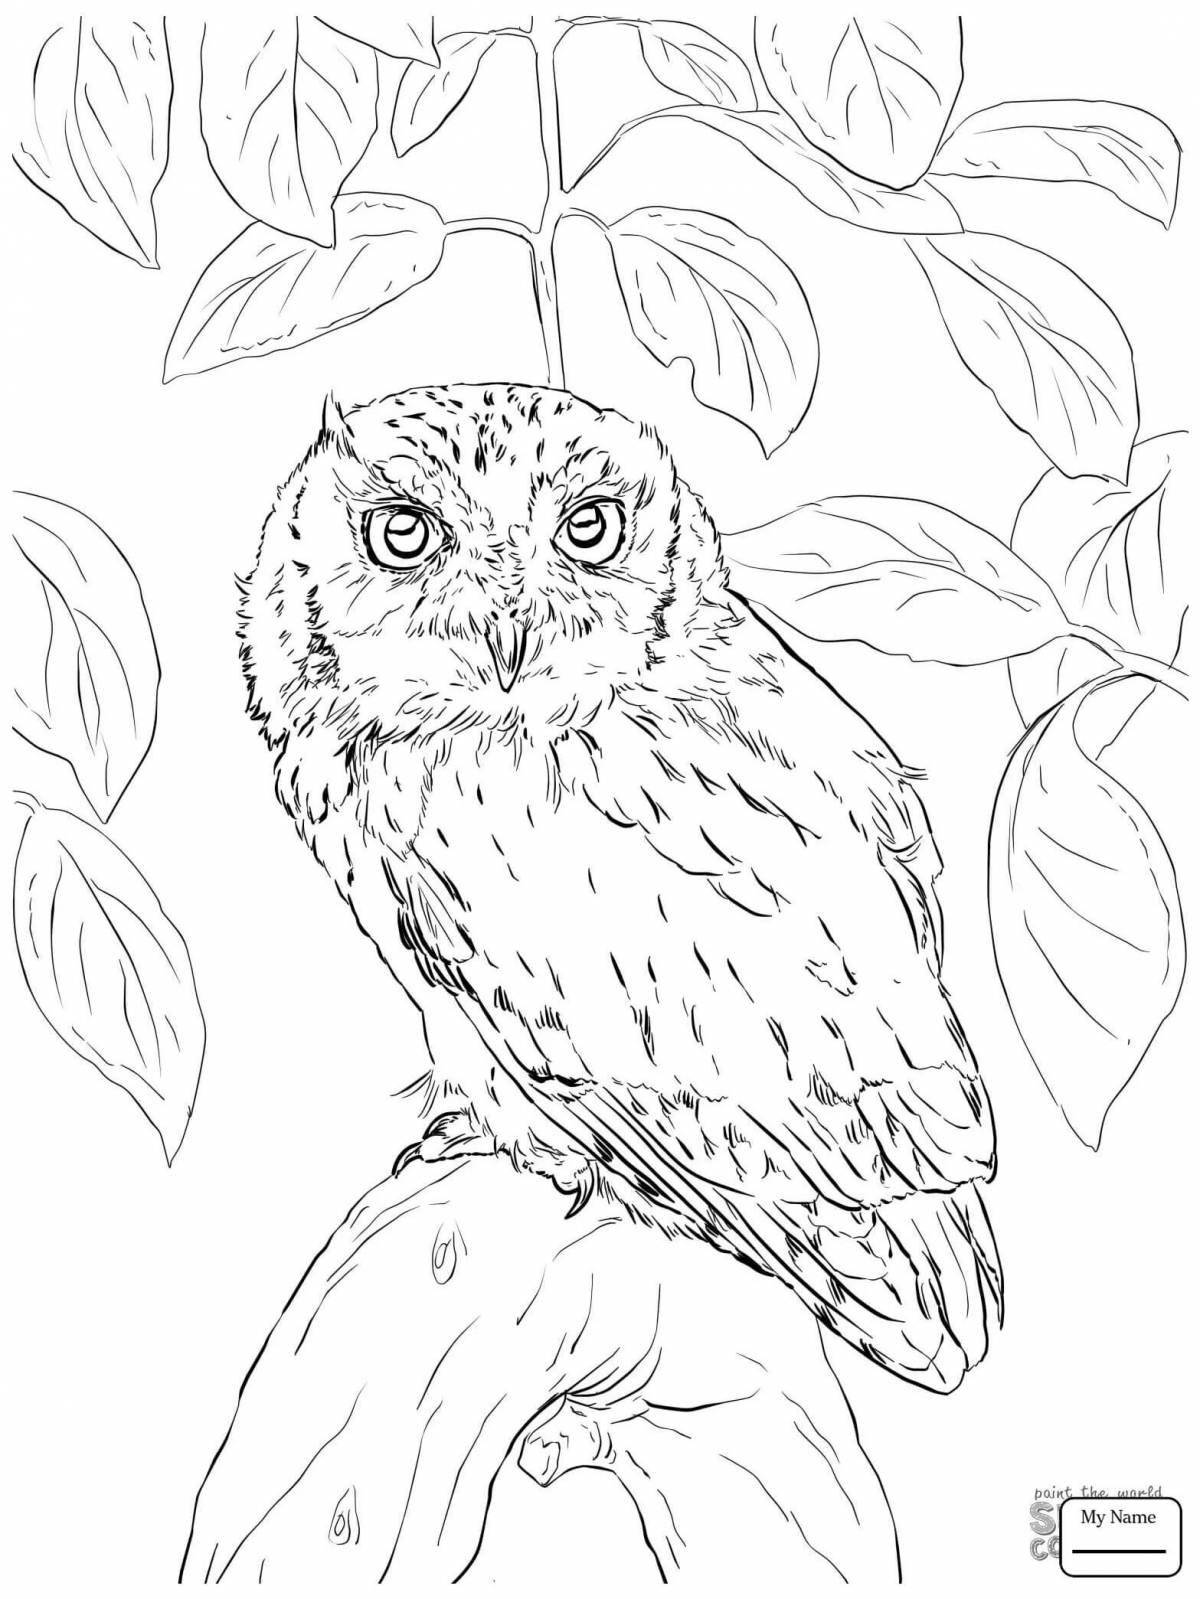 Gorgeous bianca owl coloring book